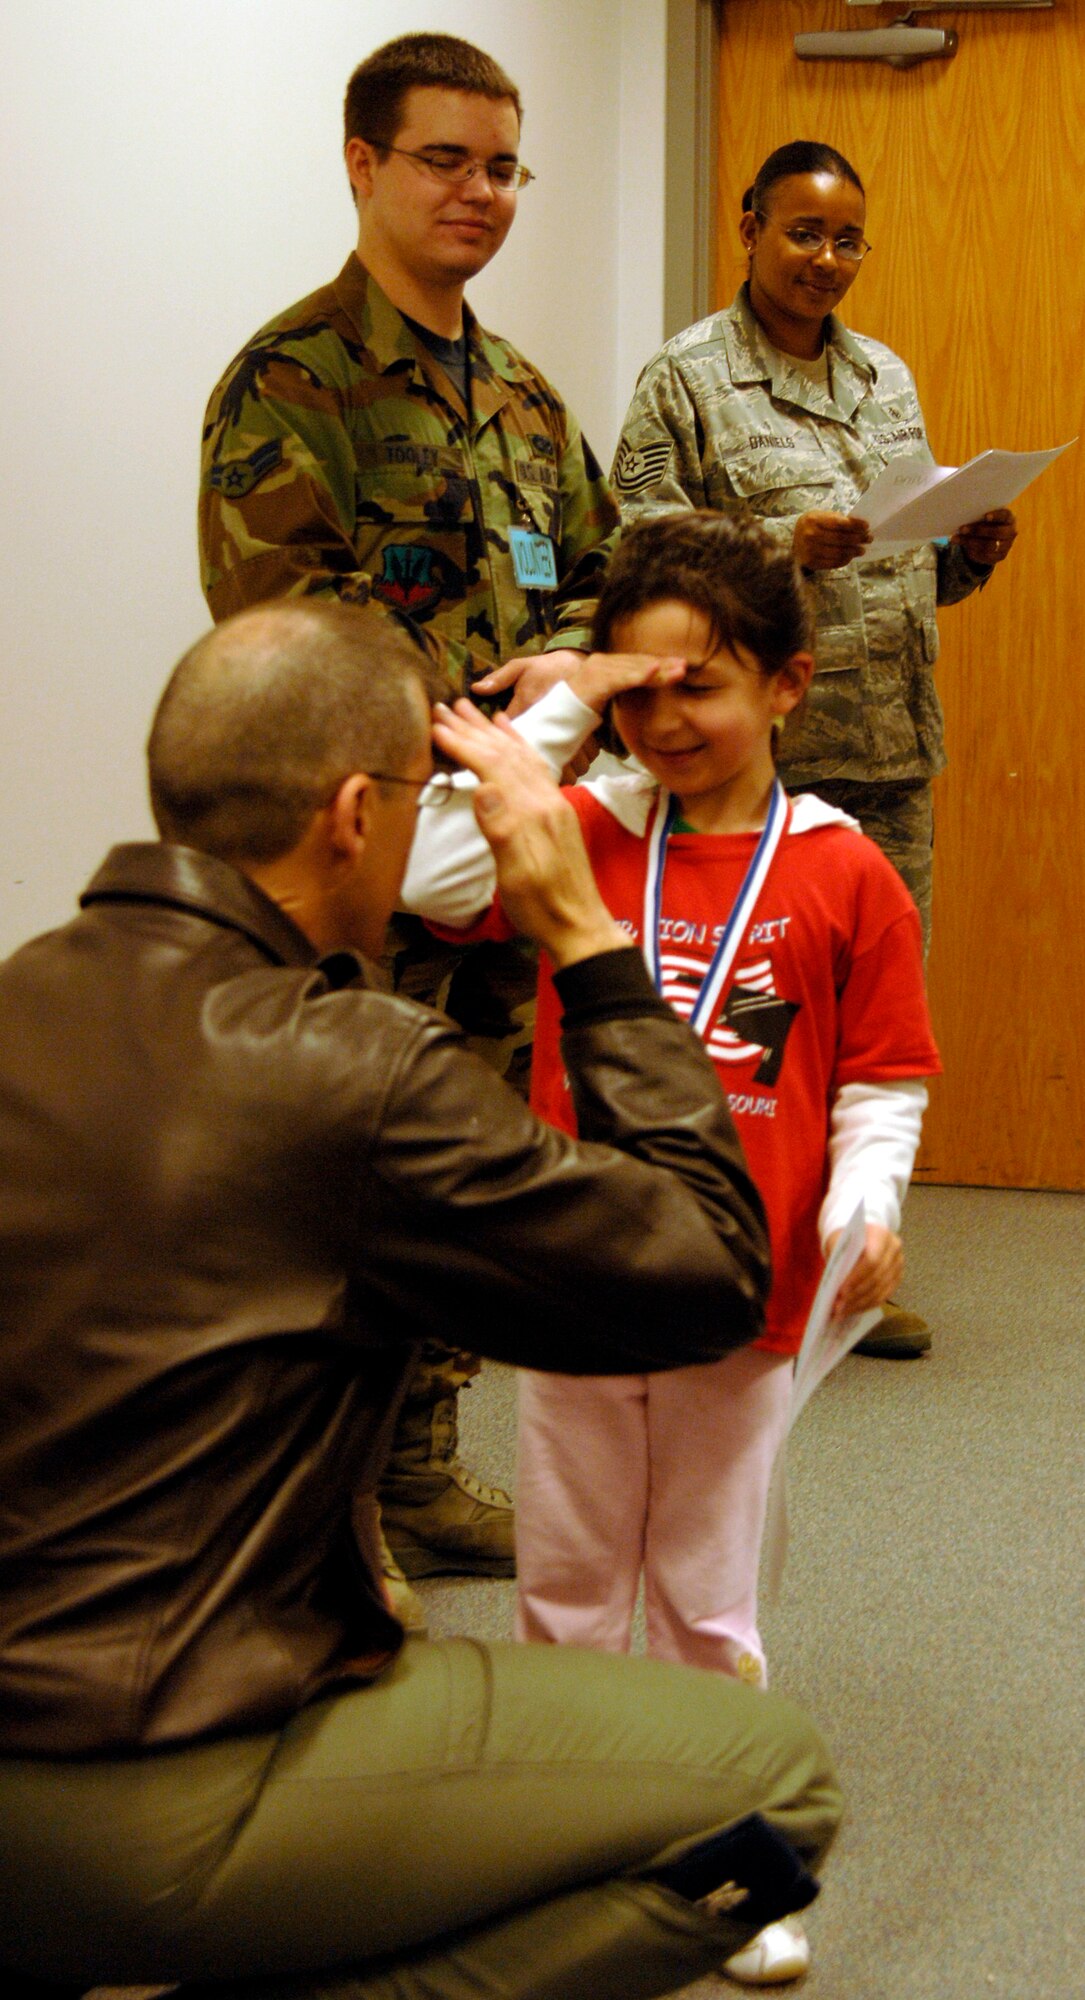 WHITEMAN AIR FORCE BASE, Mo. - "Airman" Melody Mertes salutes Col. Thomas Bussiere, 509th Operations Group commander, April 18 during an awards ceremony at Operation Spirit. Operation Spirit is a simulated deployment line for school-aged kids that allows children to experience what their military parents go through during a deployment. The "Airmen" were accompanied by their parents and received goodies form several base agencies. (U.S. Air Force photo/Staff Sgt. Jason Barebo)